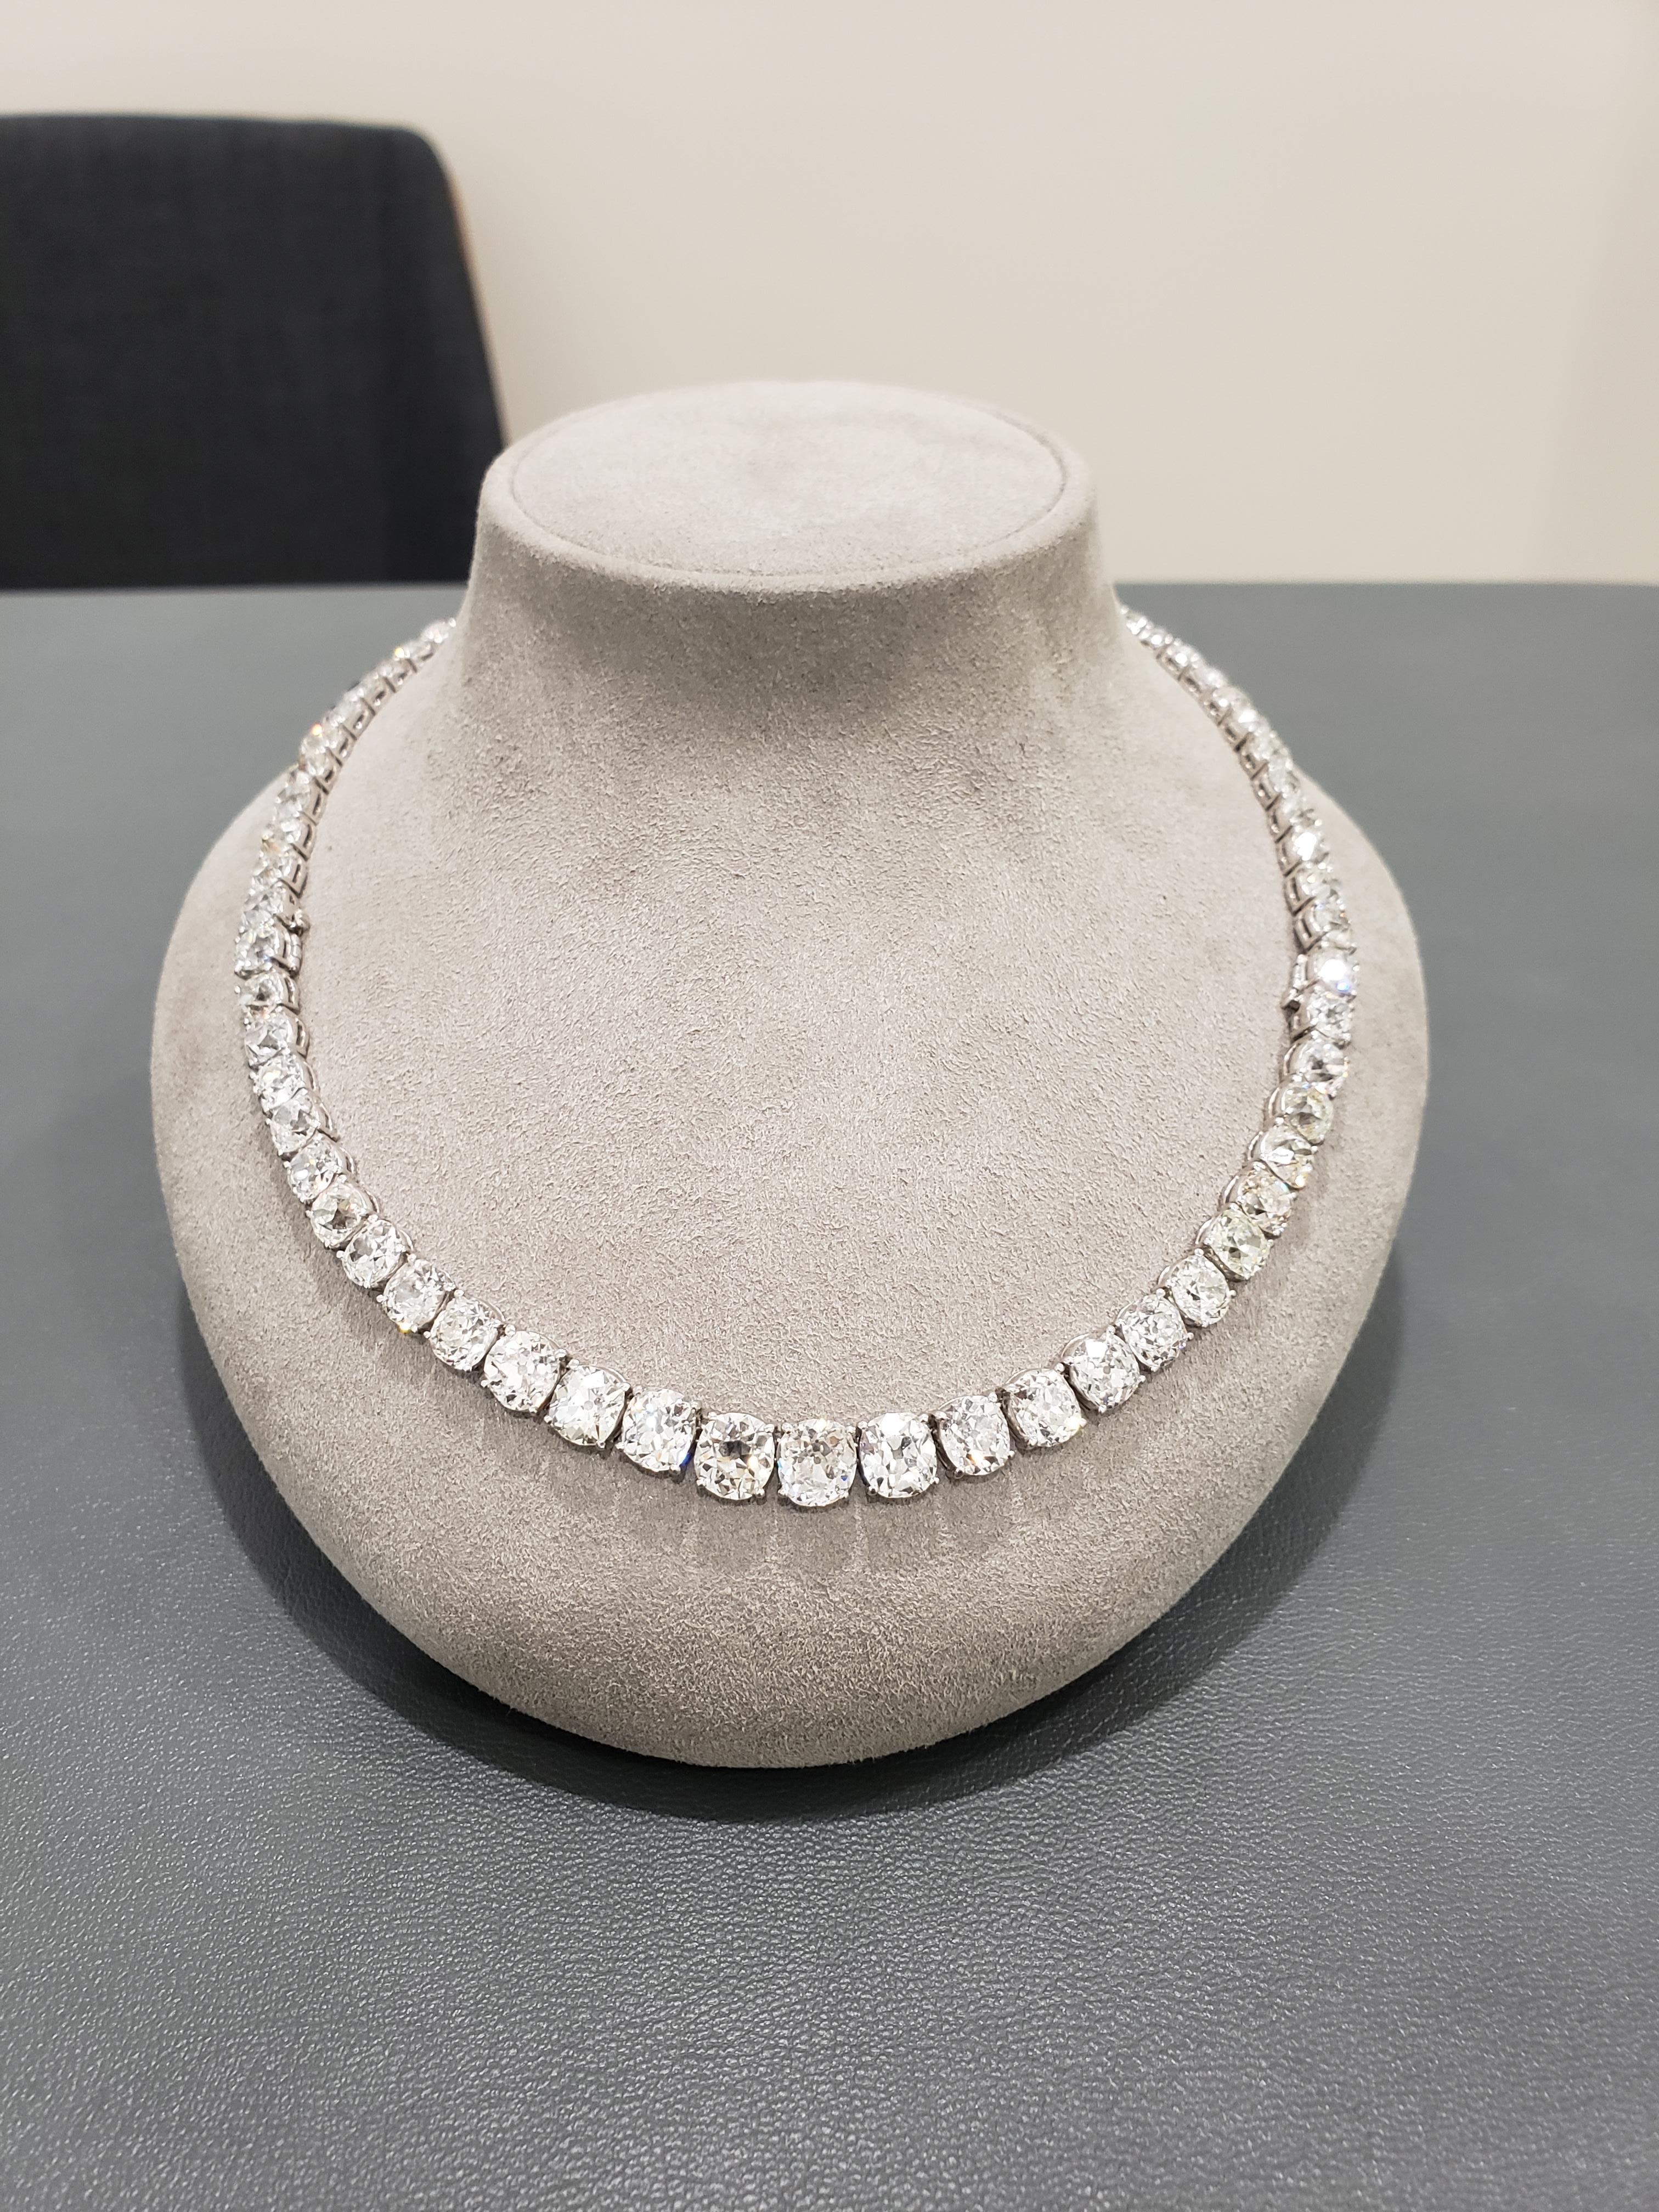 Important Riviere Necklace set with 47 Old European cut diamonds weighing 46.10 carats total. Each diamond graduates larger as it gets to the center of the necklace. Set in platinum.

Style available in different price ranges. Prices are based on